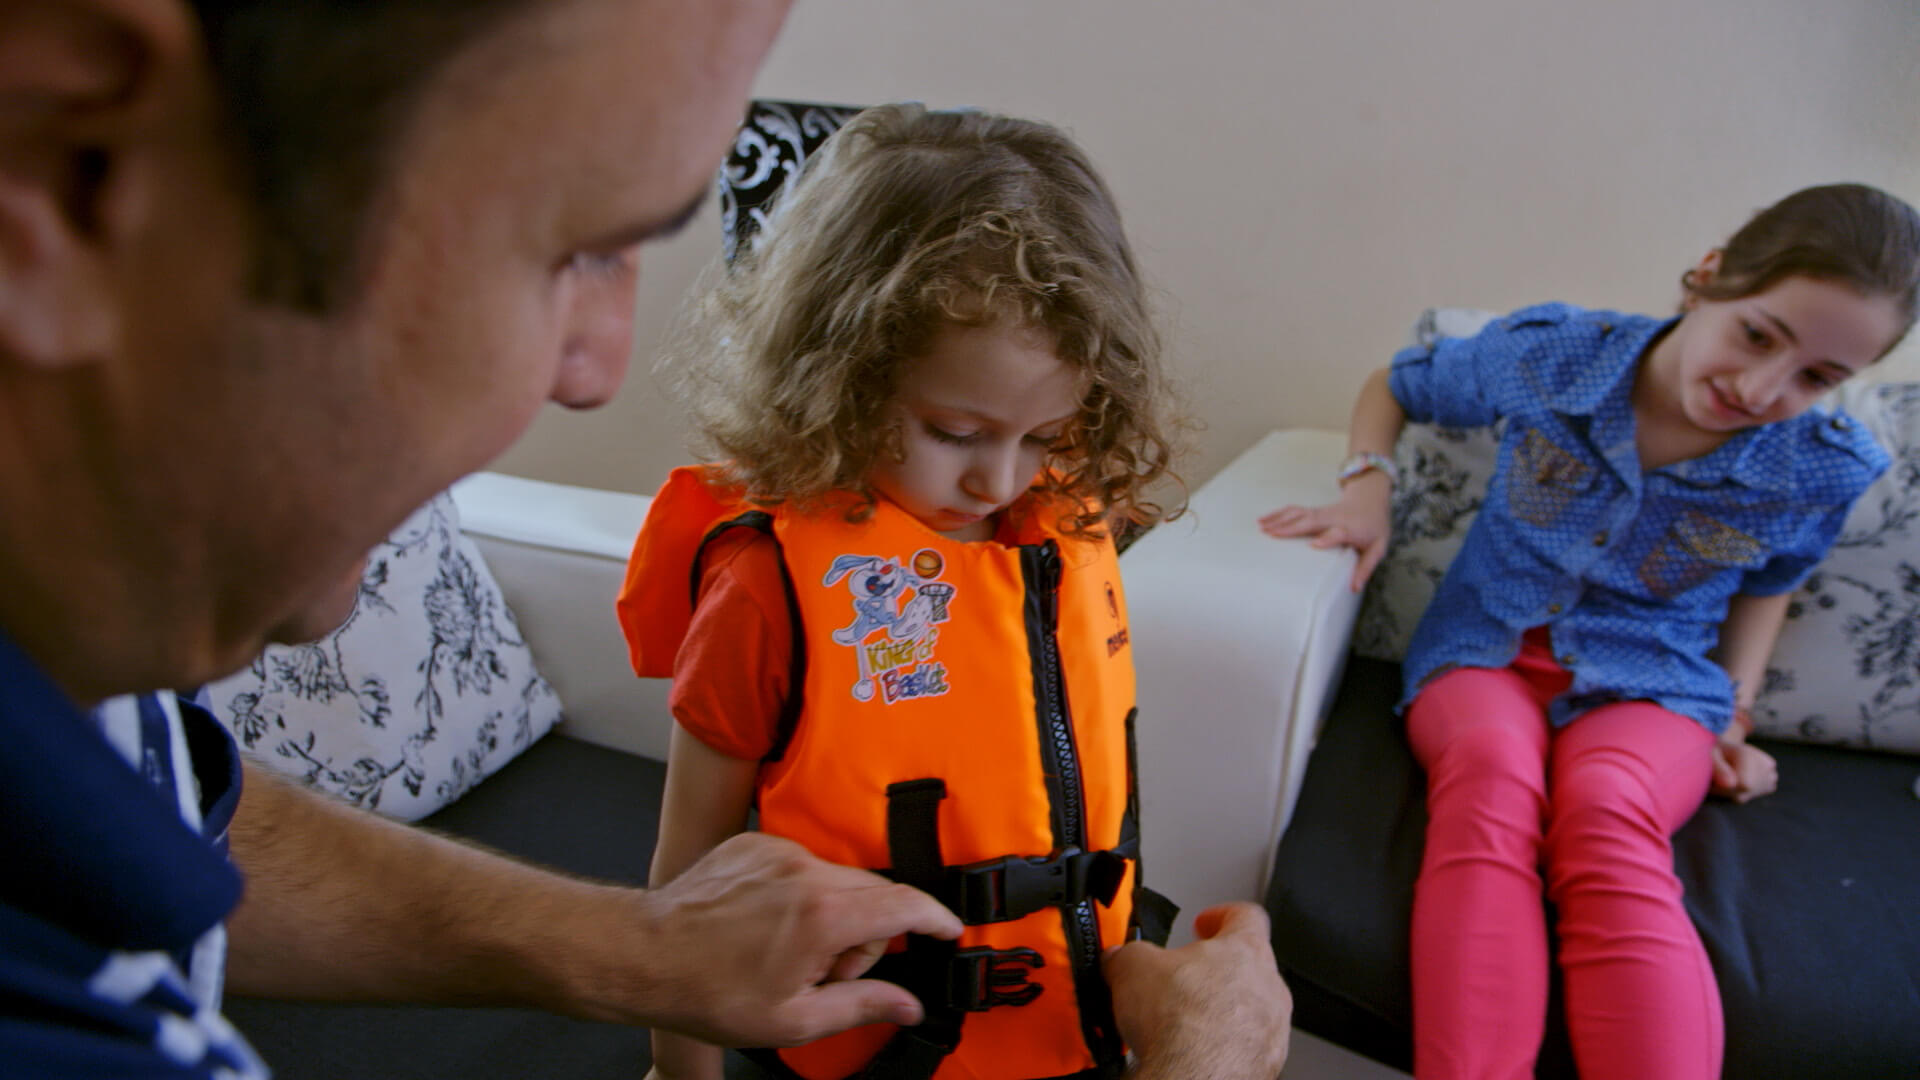 Still from It Will Be Chaos. A child is wearing a bright orange life vest and is looking down as a man is buckling the straps of the vest. A young girl is looking on.